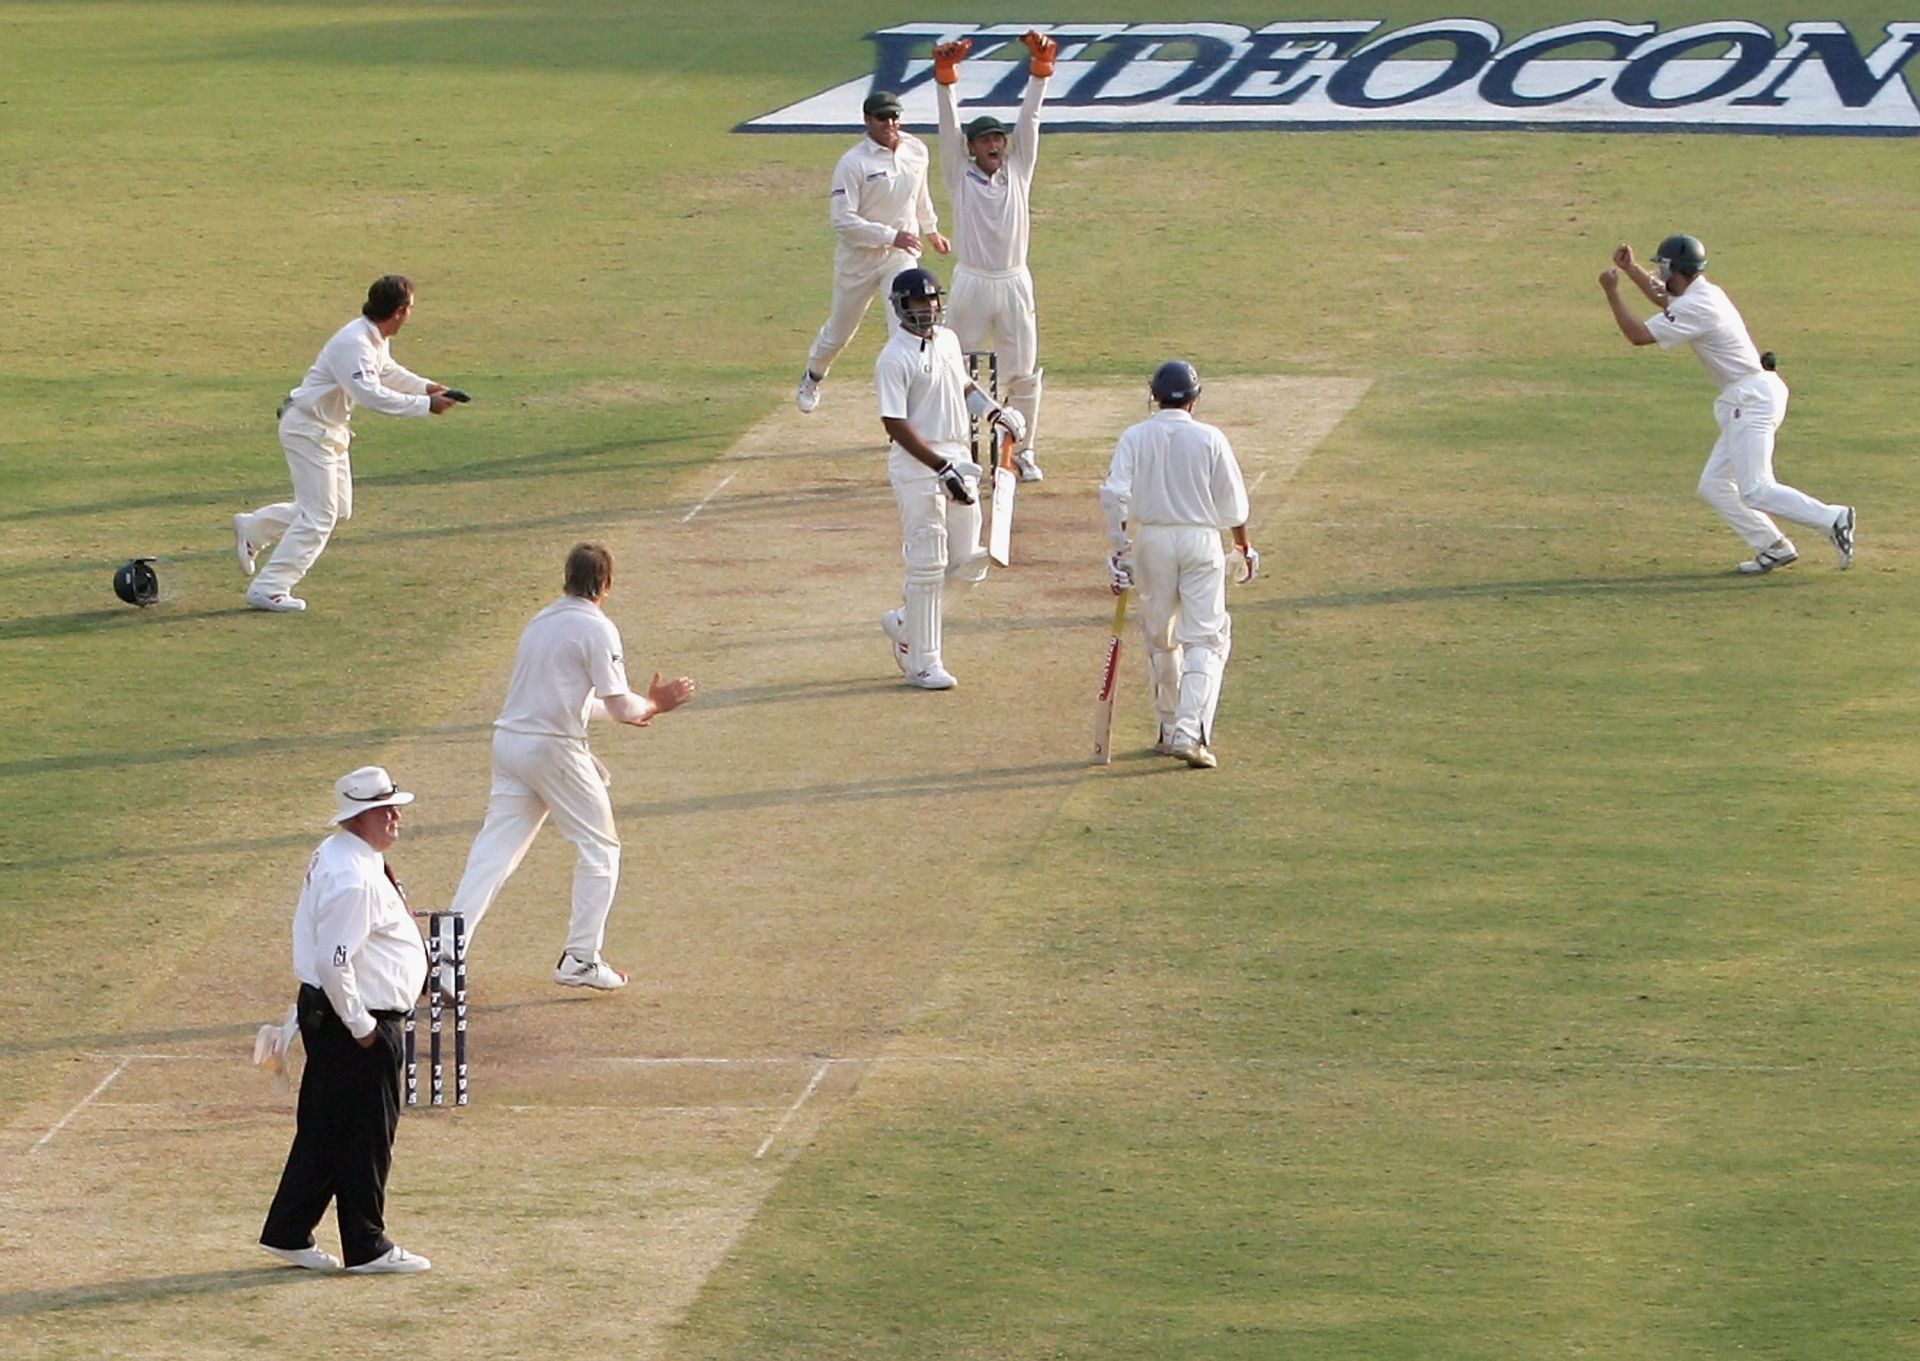 In 2004, a greentop had been prepared for the crucial 3rd Test between India and Australia at Nagpur, which helped the visitors win a series in India after a long time 